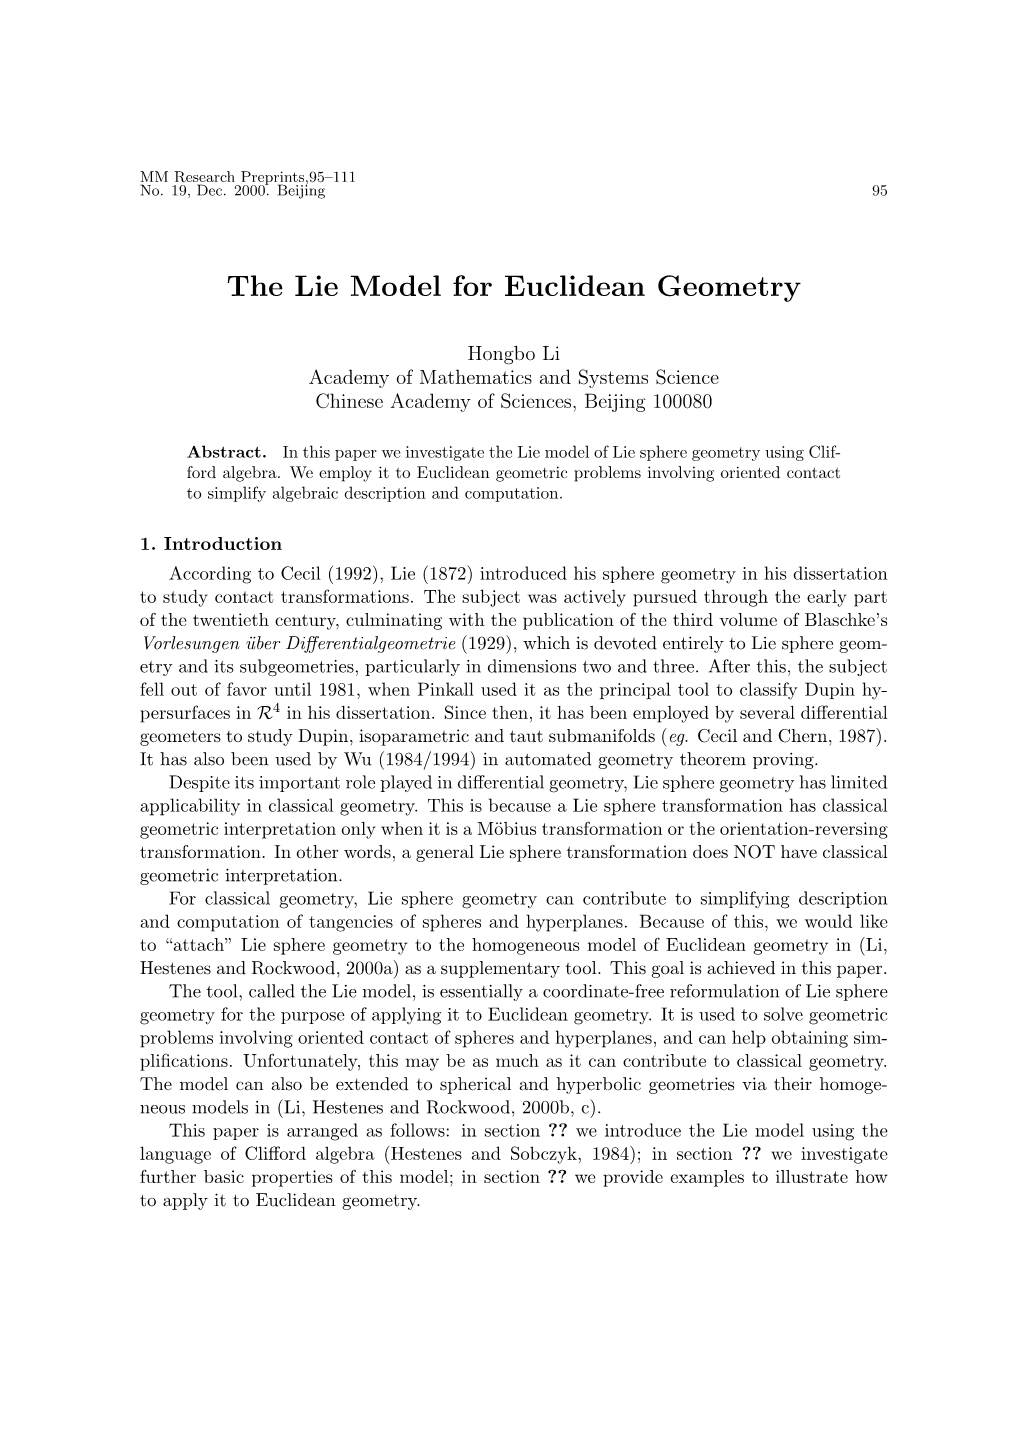 The Lie Model for Euclidean Geometry